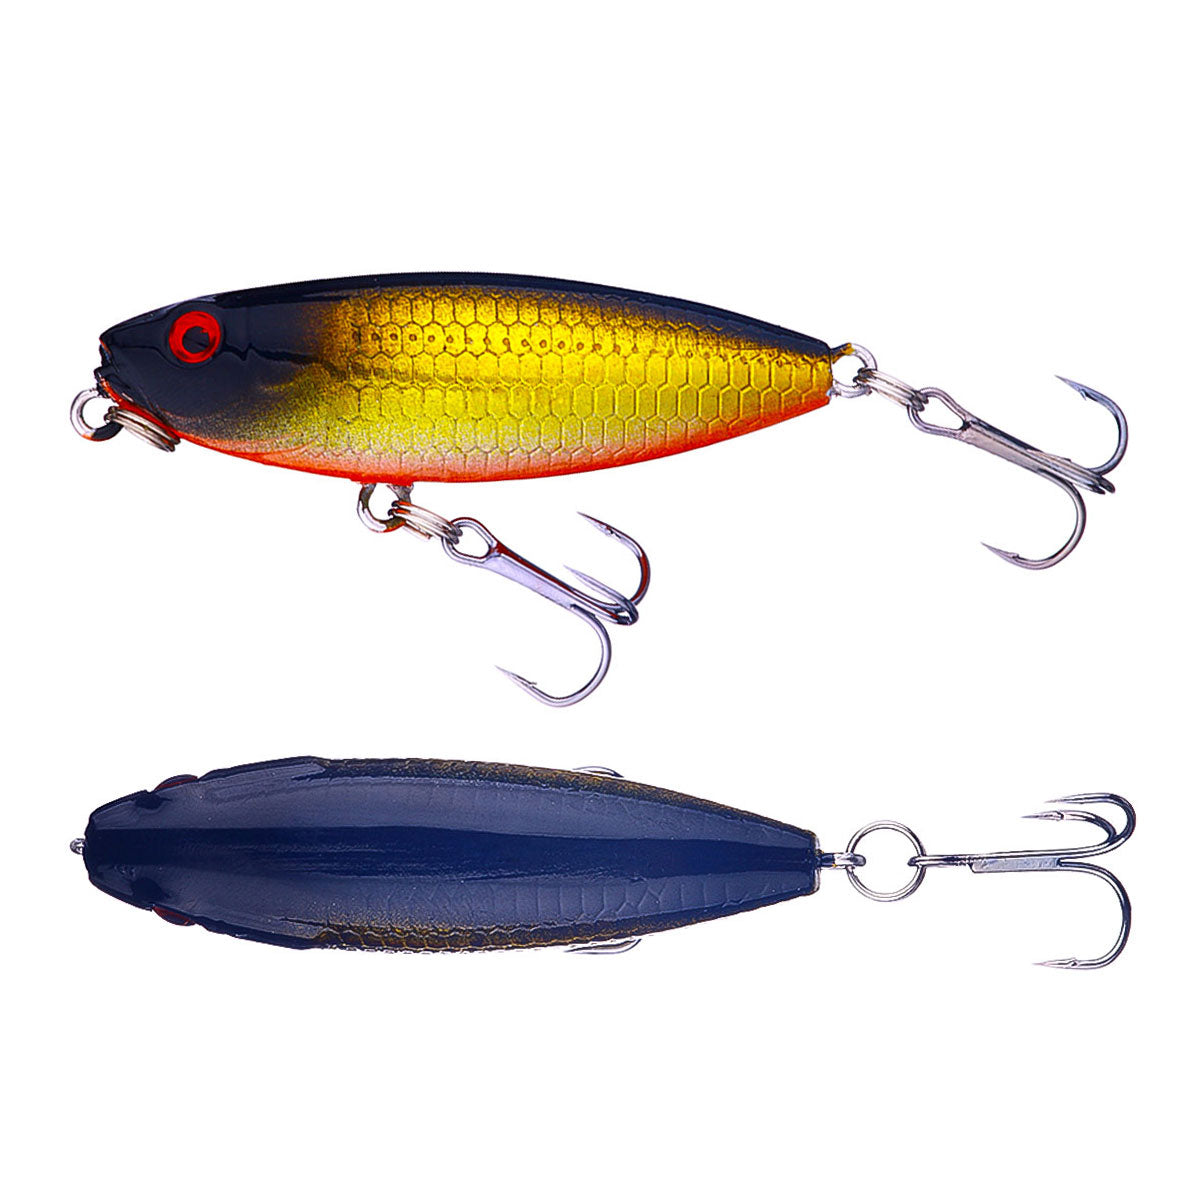 Topwater Popper Fishing Lures 80mm 16g Hard Stick Baits Light Reflection  Wobblers for Sea Bass (Color : 04, Size : 80mm 16g), Topwater Lures -   Canada